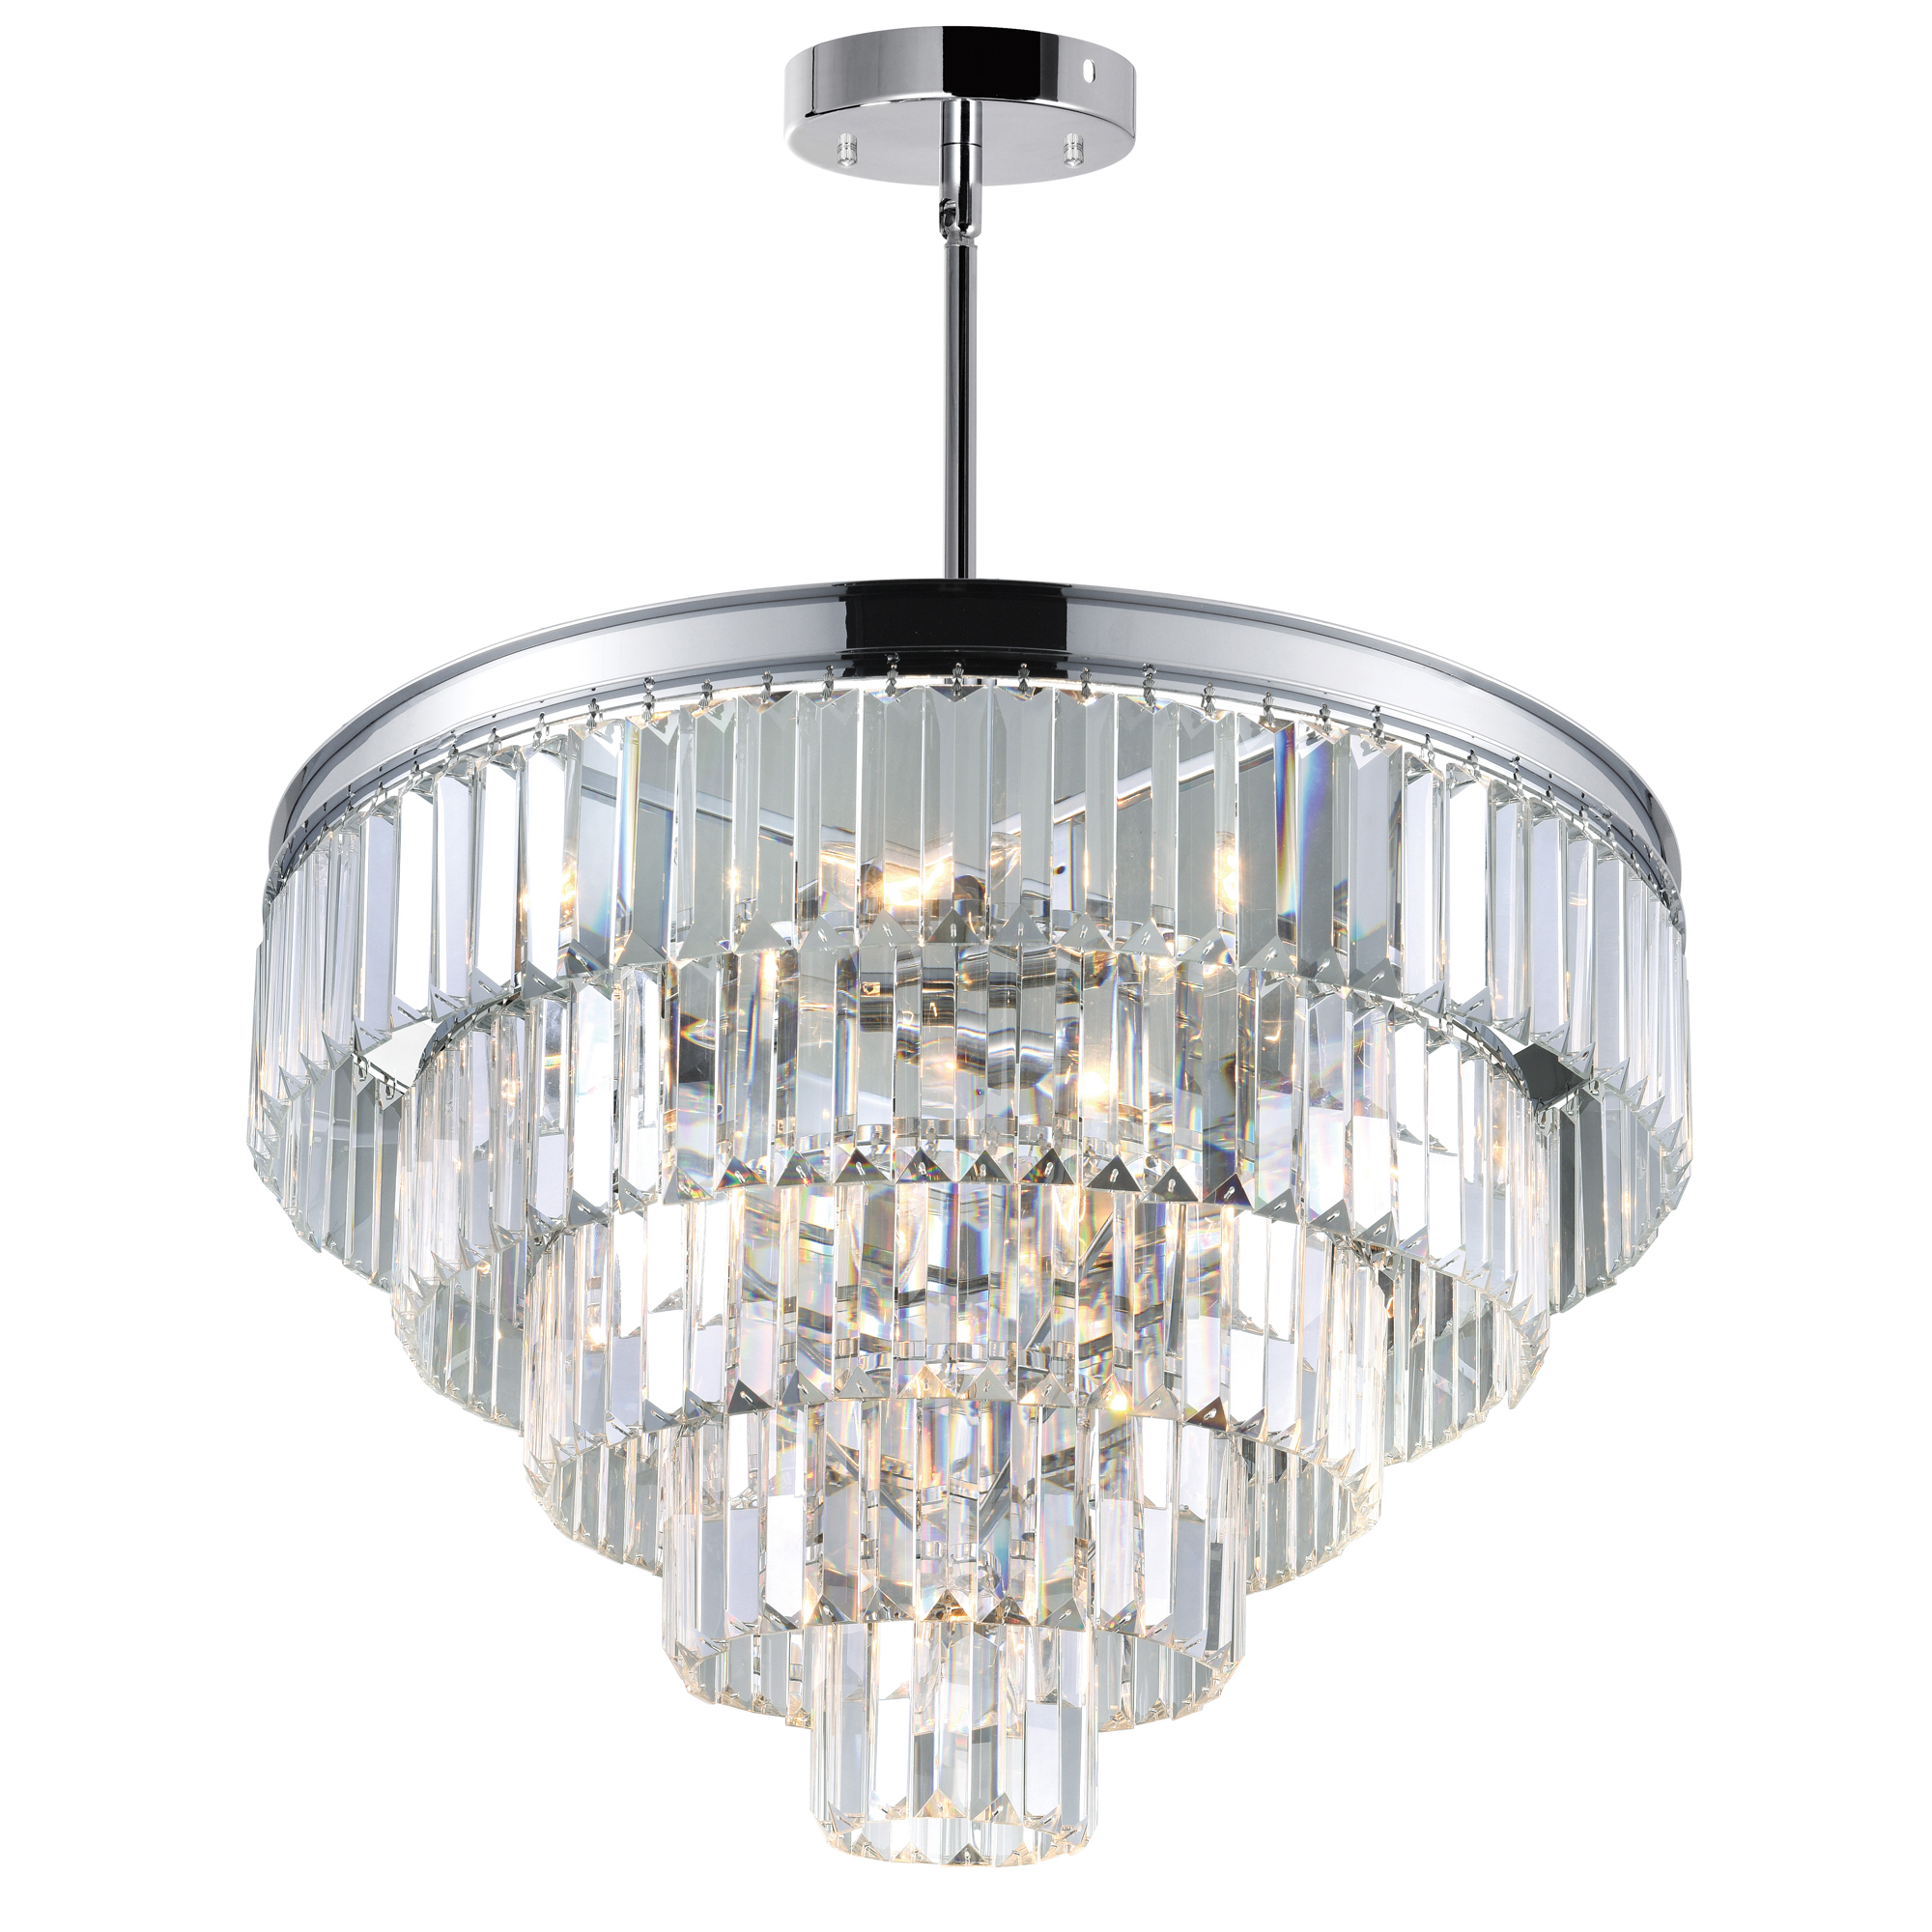 Weiss 12 Light Down Chandelier With Chrome Finish